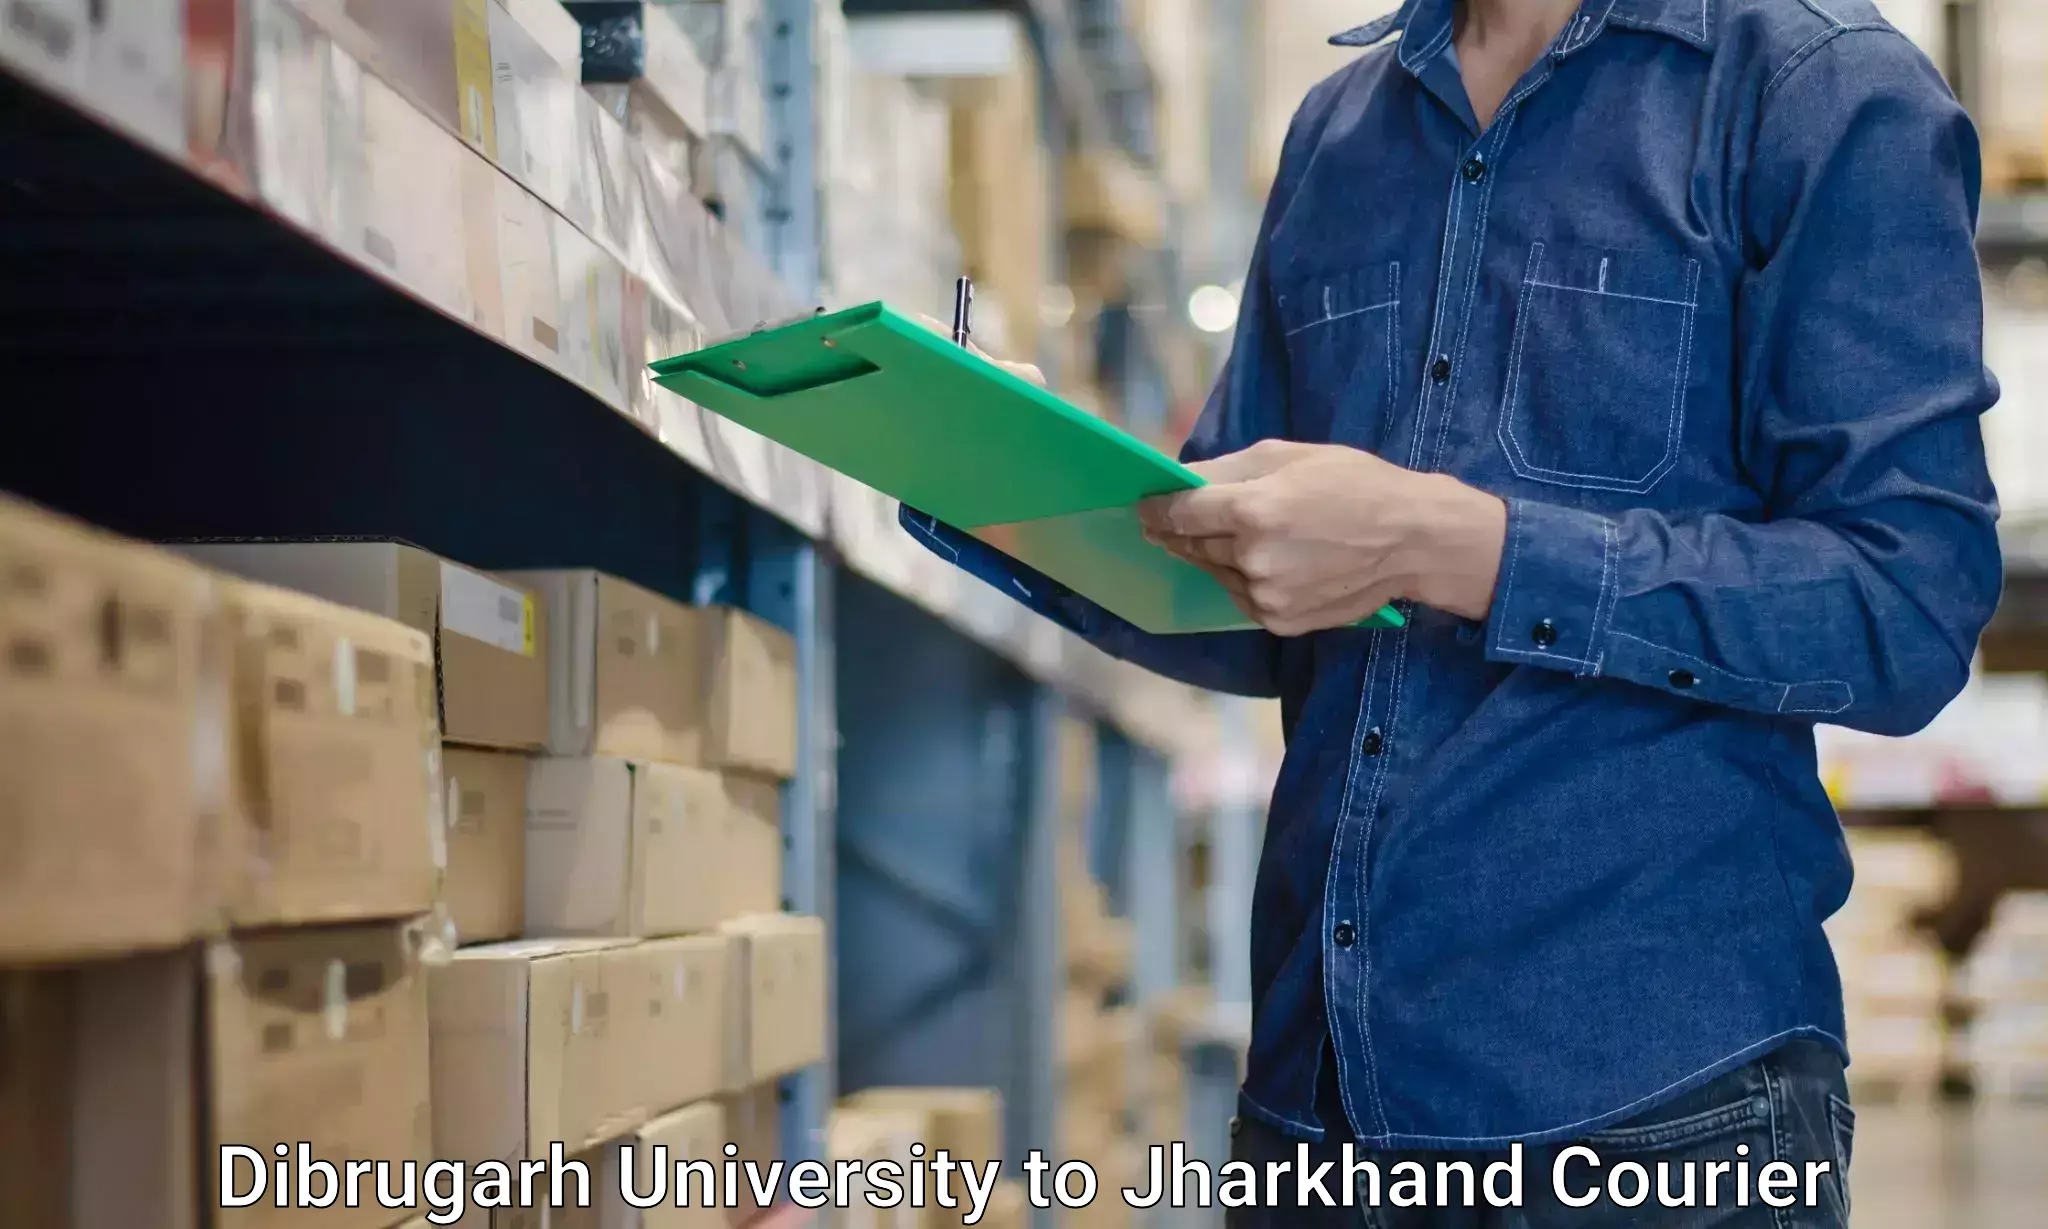 Tailored moving services Dibrugarh University to Mahagama